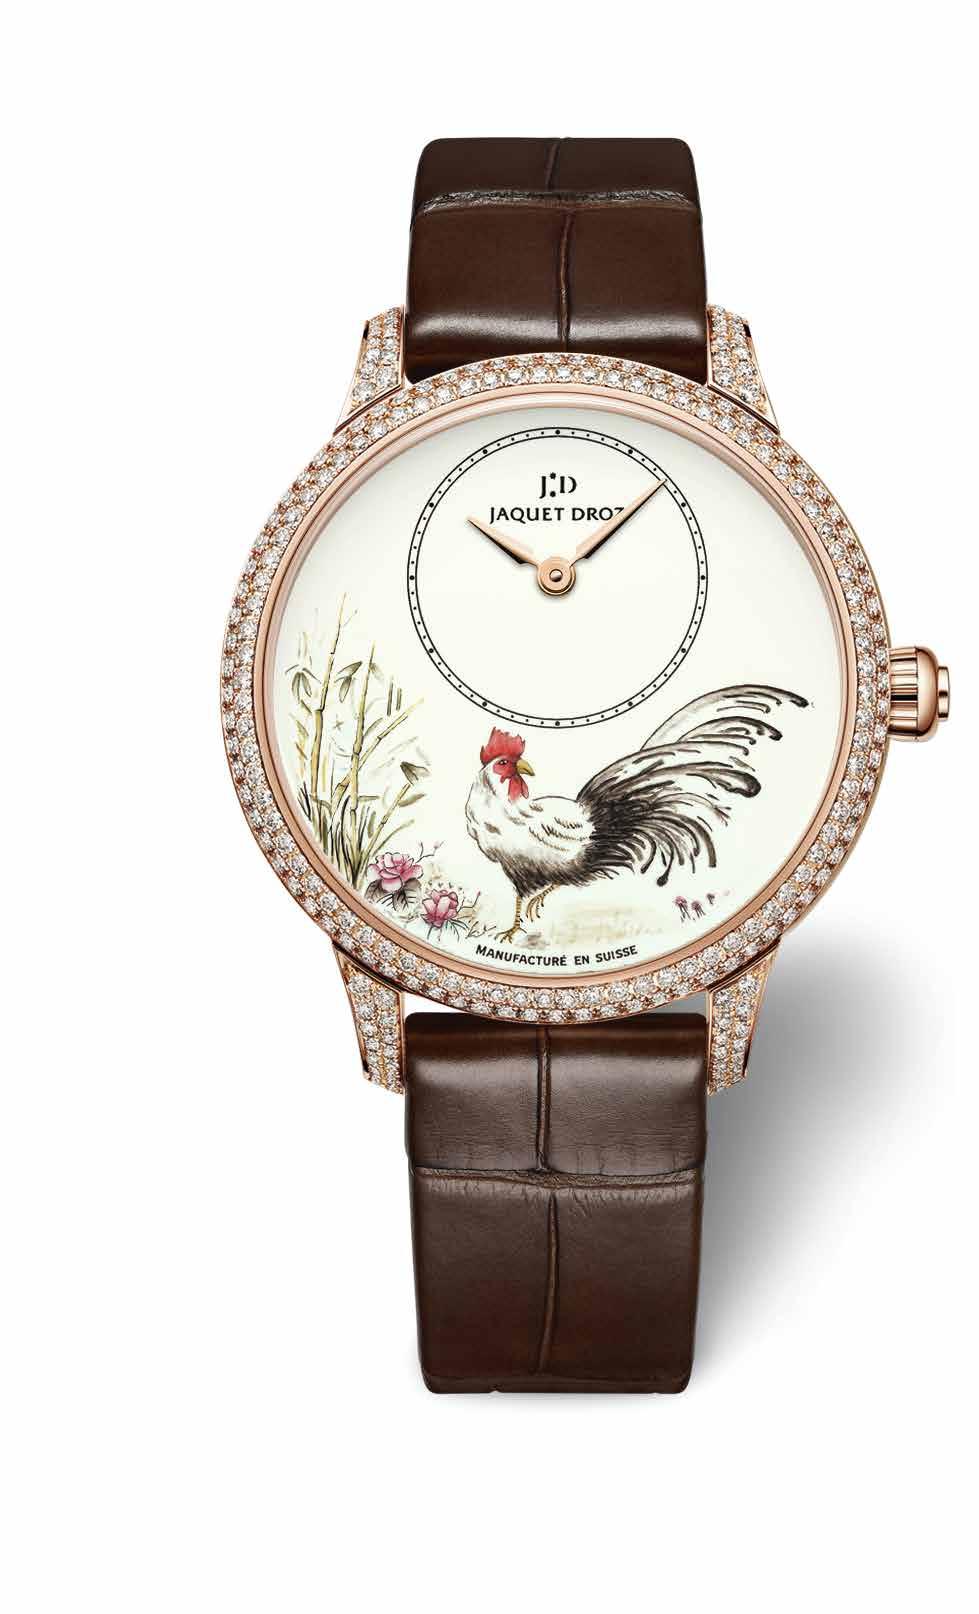 www.jaquet-droz.com Petite Heure Minute Rooster Watch, ivory grand feu enamel dial with miniature painting, 18K red gold case set with diamonds (1.